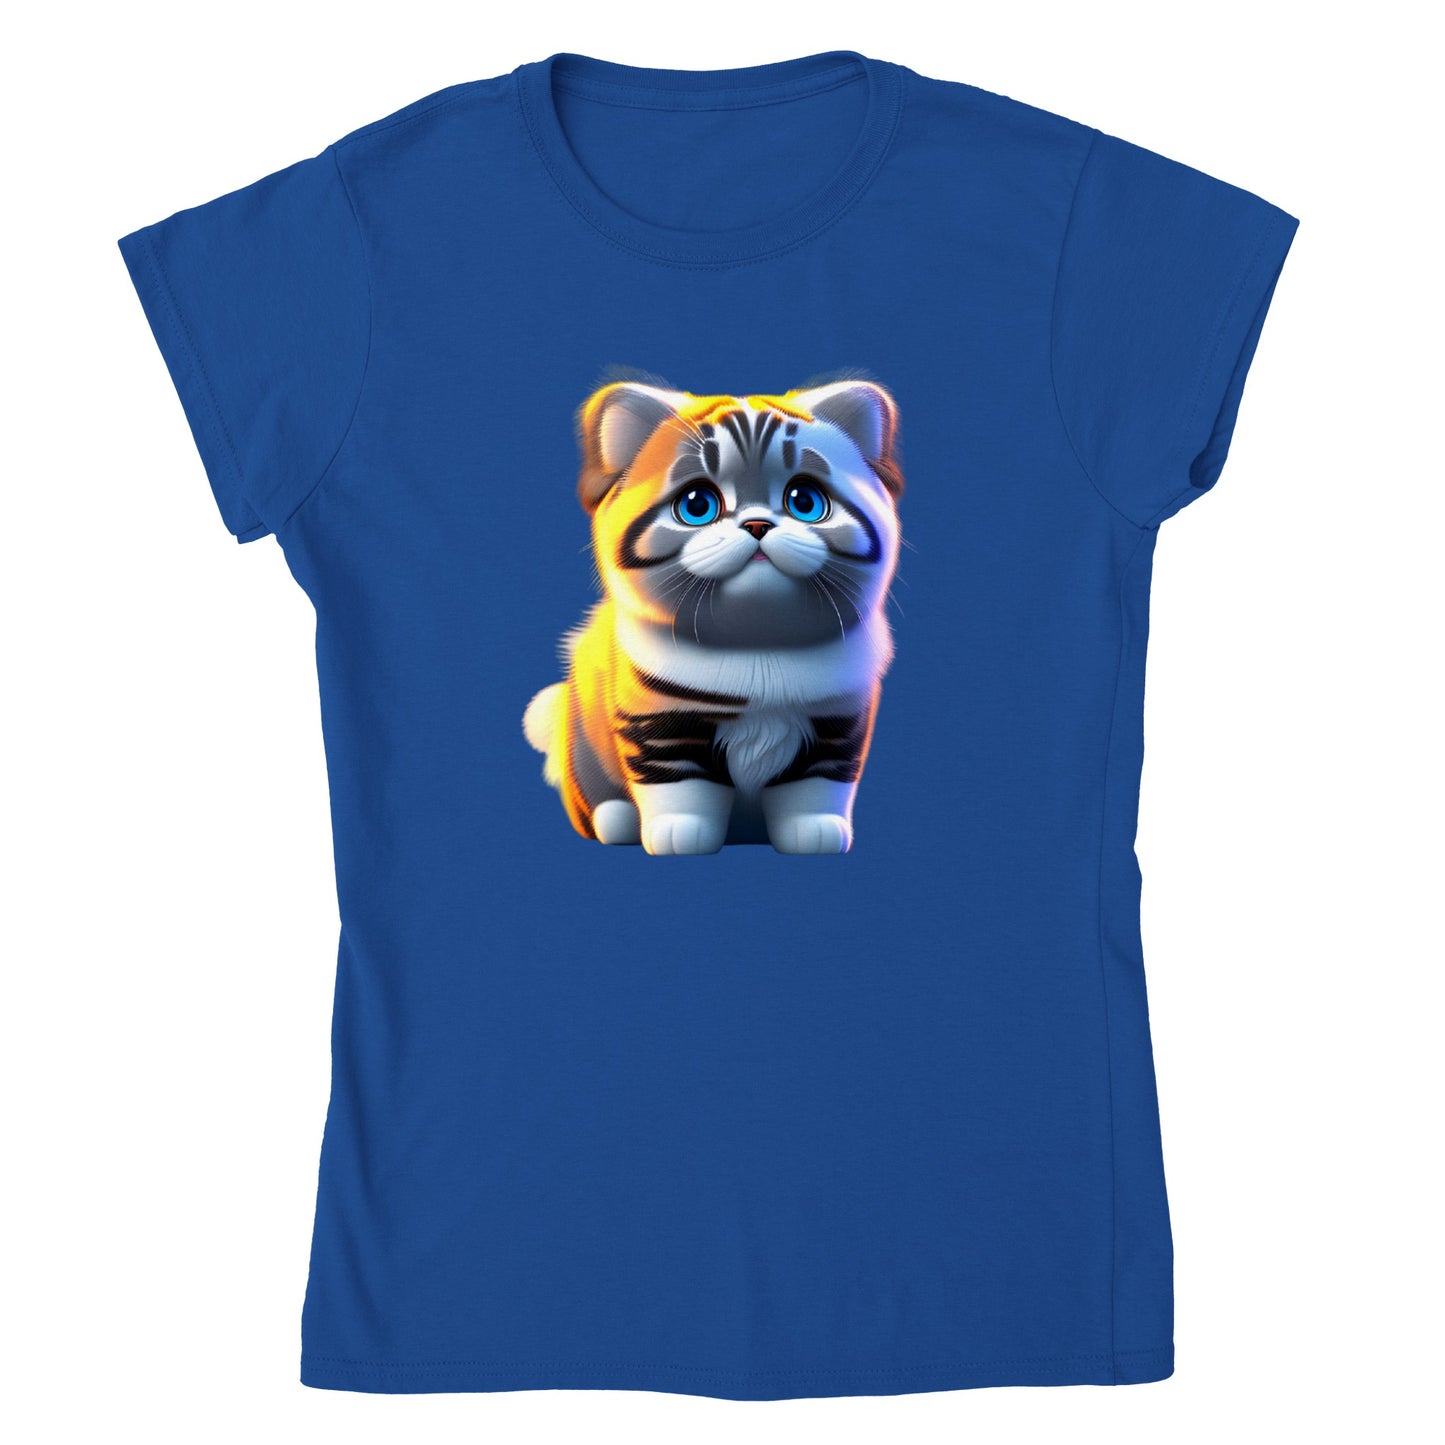 Adorable, Cool, Cute Cats and Kittens Toy - Classic Women’s Crewneck T-Shirt 44